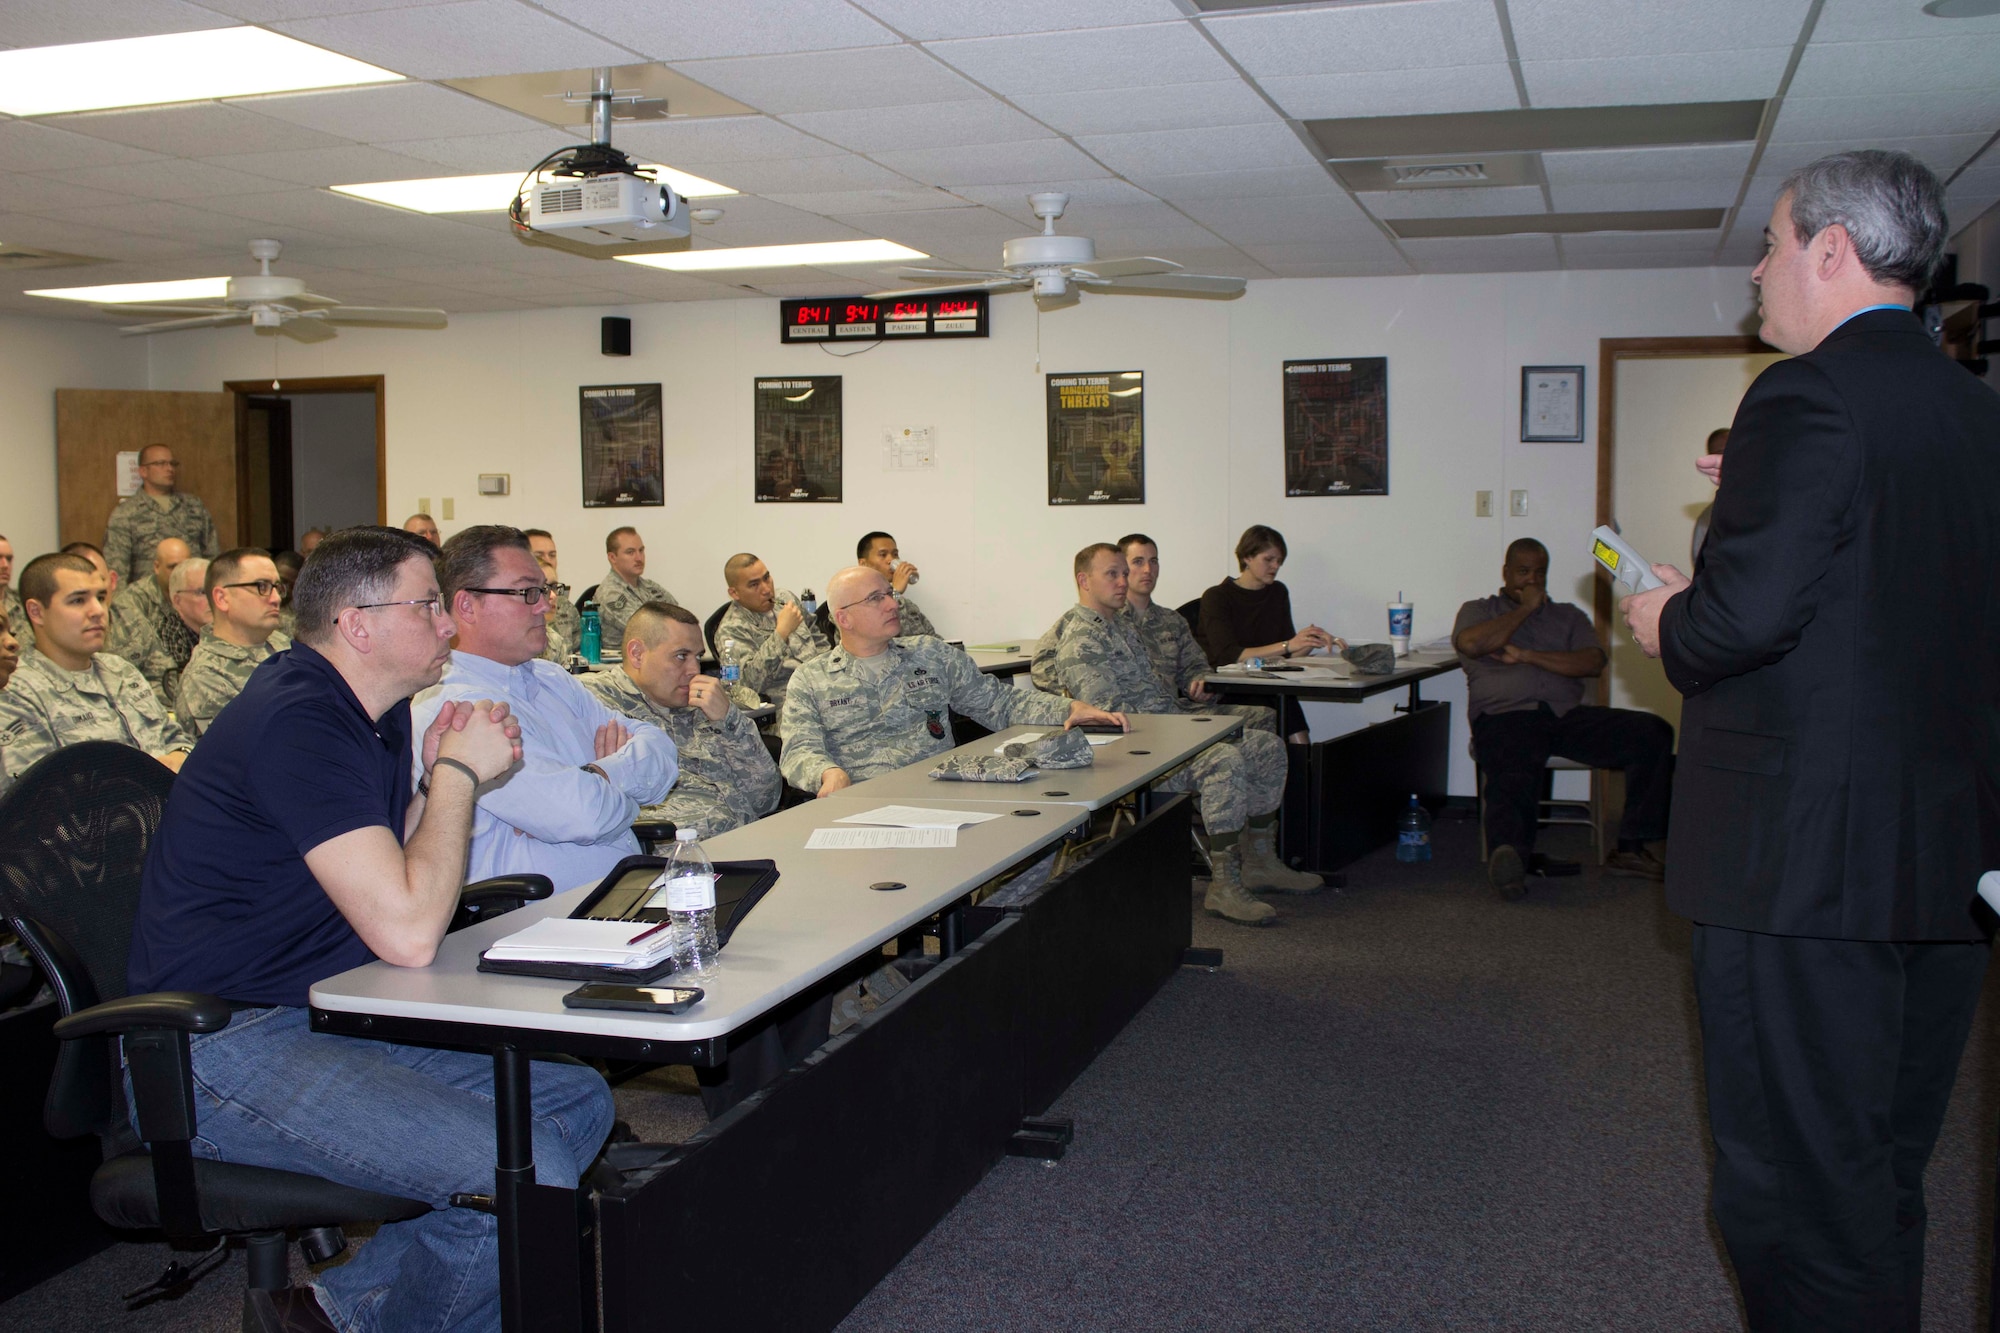 John Moroney, work management specialist at the Air Force Civil Engineer Center Operations Maintenance Division at Tyndall Air Force Base, Florida, discusses a business process training lesson at Scott AFB, Illinois, during an AFCEC team visit to the base in March 2016. The goal of the visit was to inform operations flight personnel of the organization and business process changes required to prepare for the NexGenIT initial operating capability. (Air Force Photo/Susan Lawson/Released)